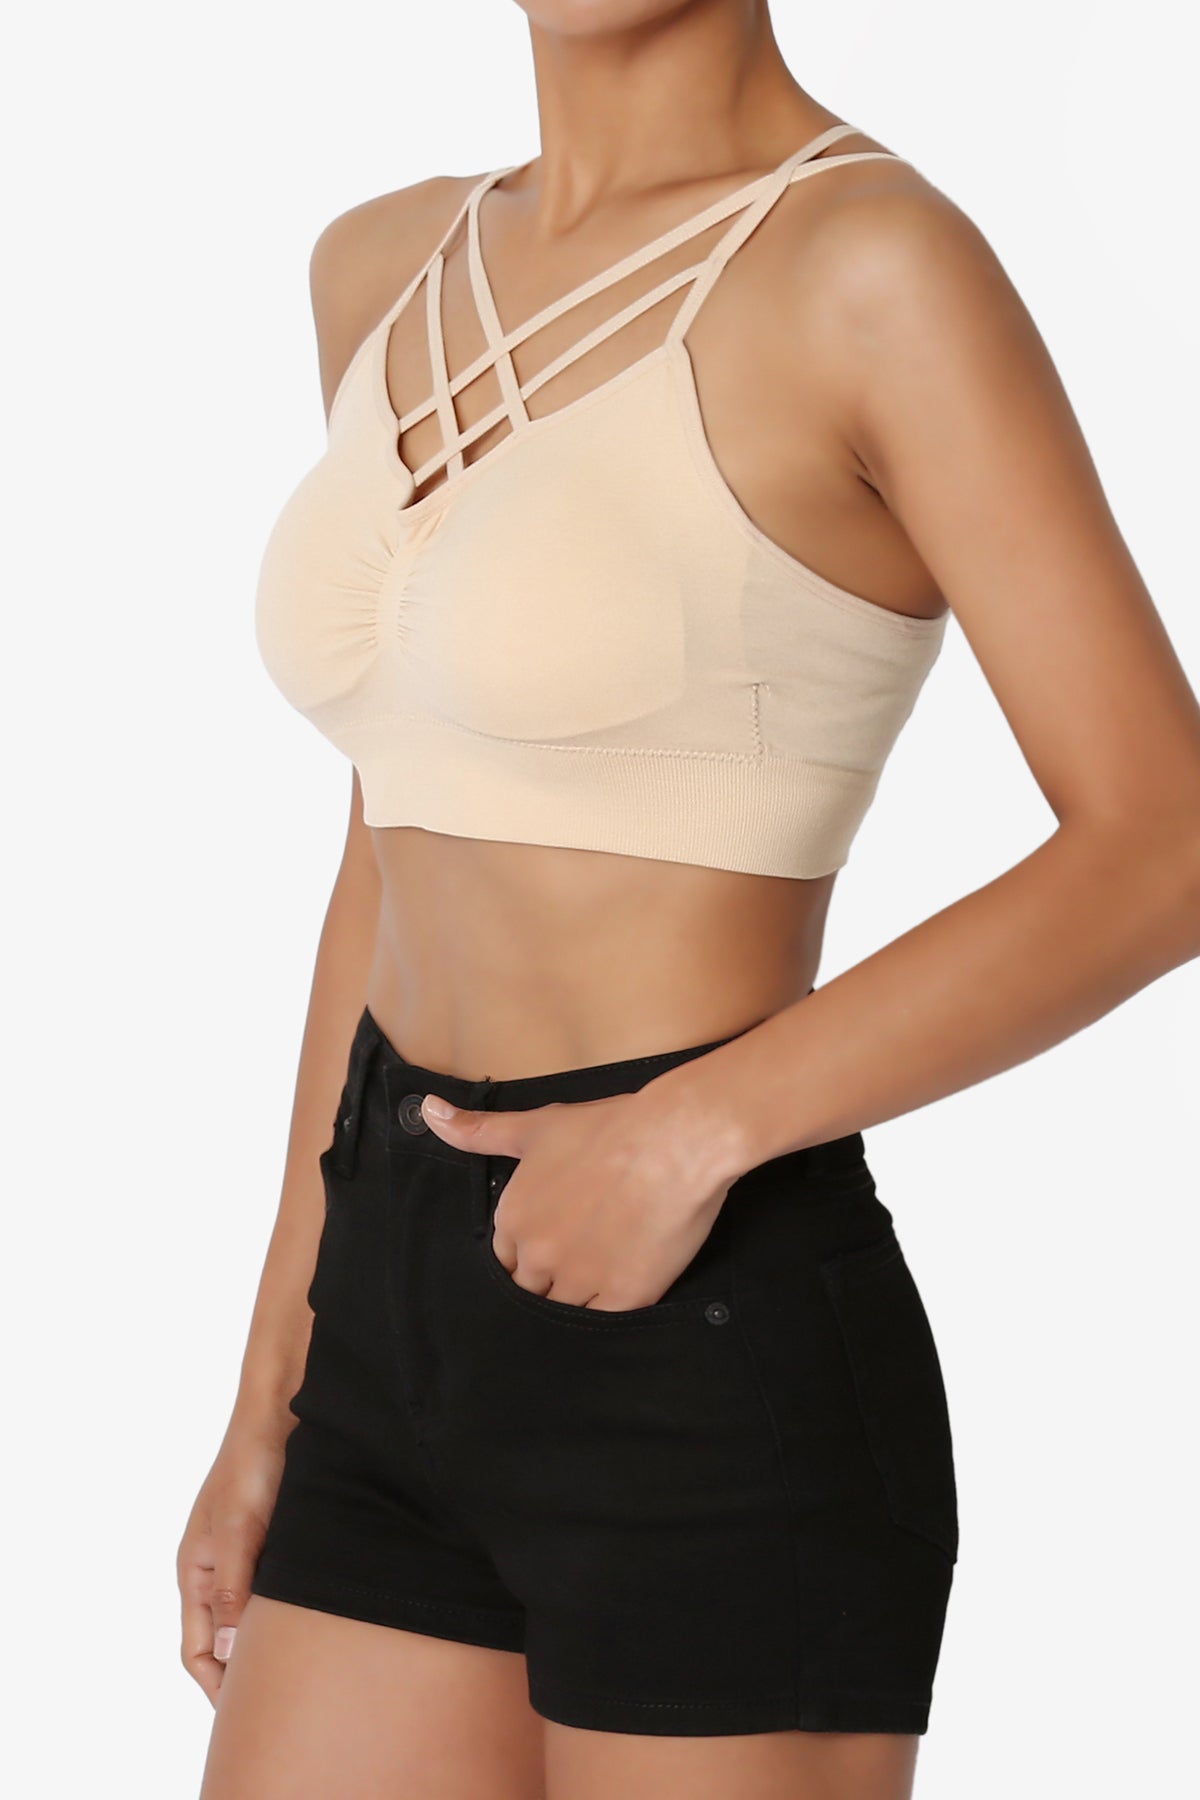 Catyna Caged Padded Bra Top PLUS